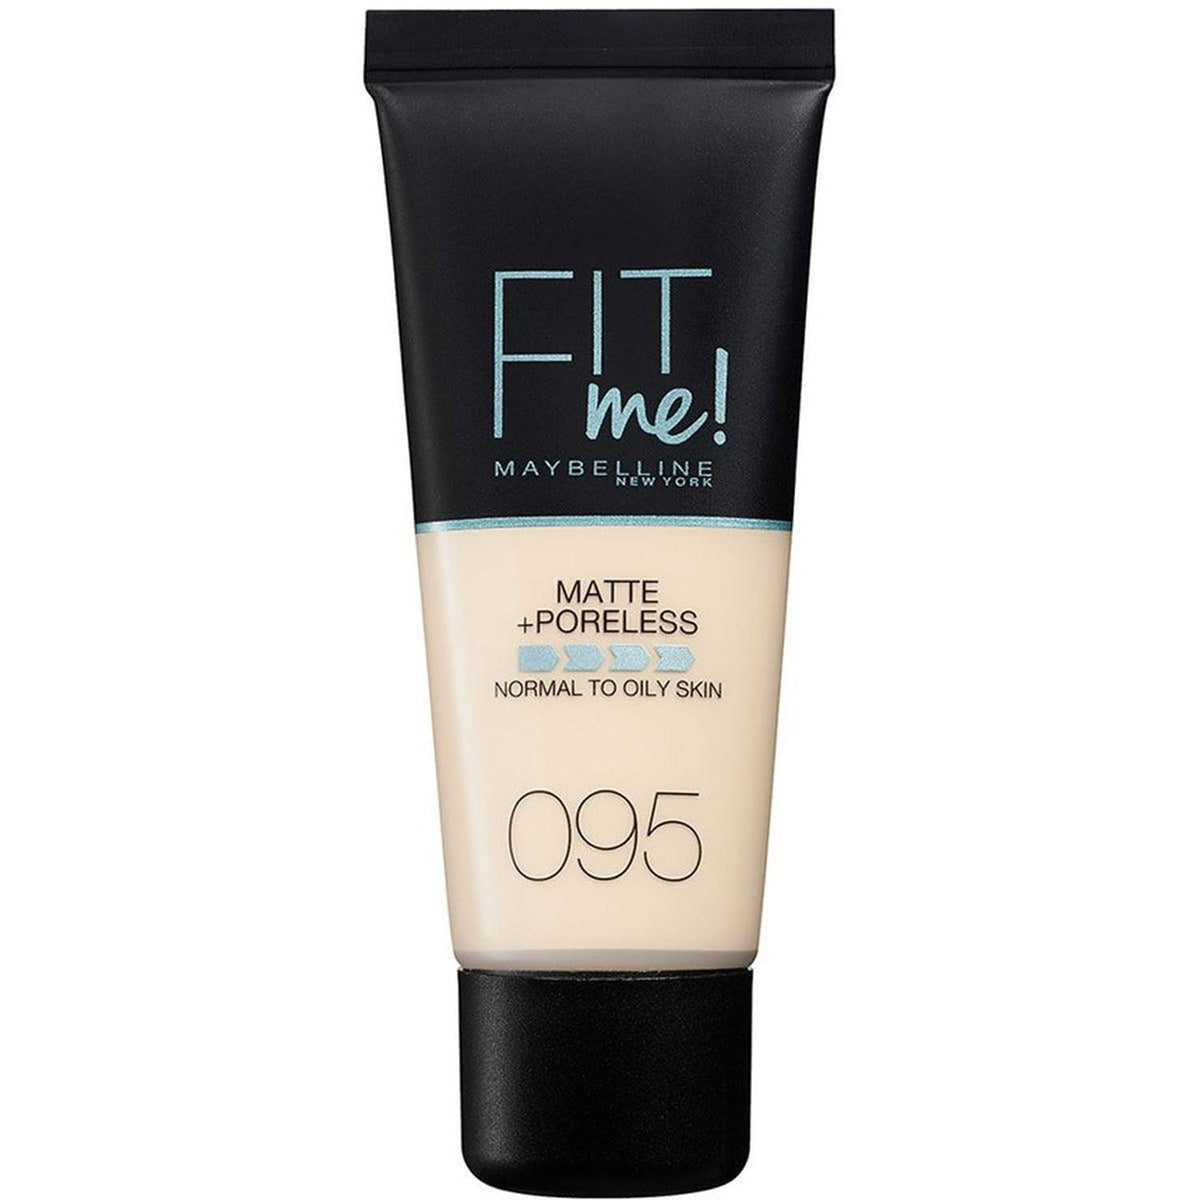 Maybelline Fit Me Foundation, Matte & Poreless, Full Coverage Blendable Normal to Oily Skin, 095 Fair